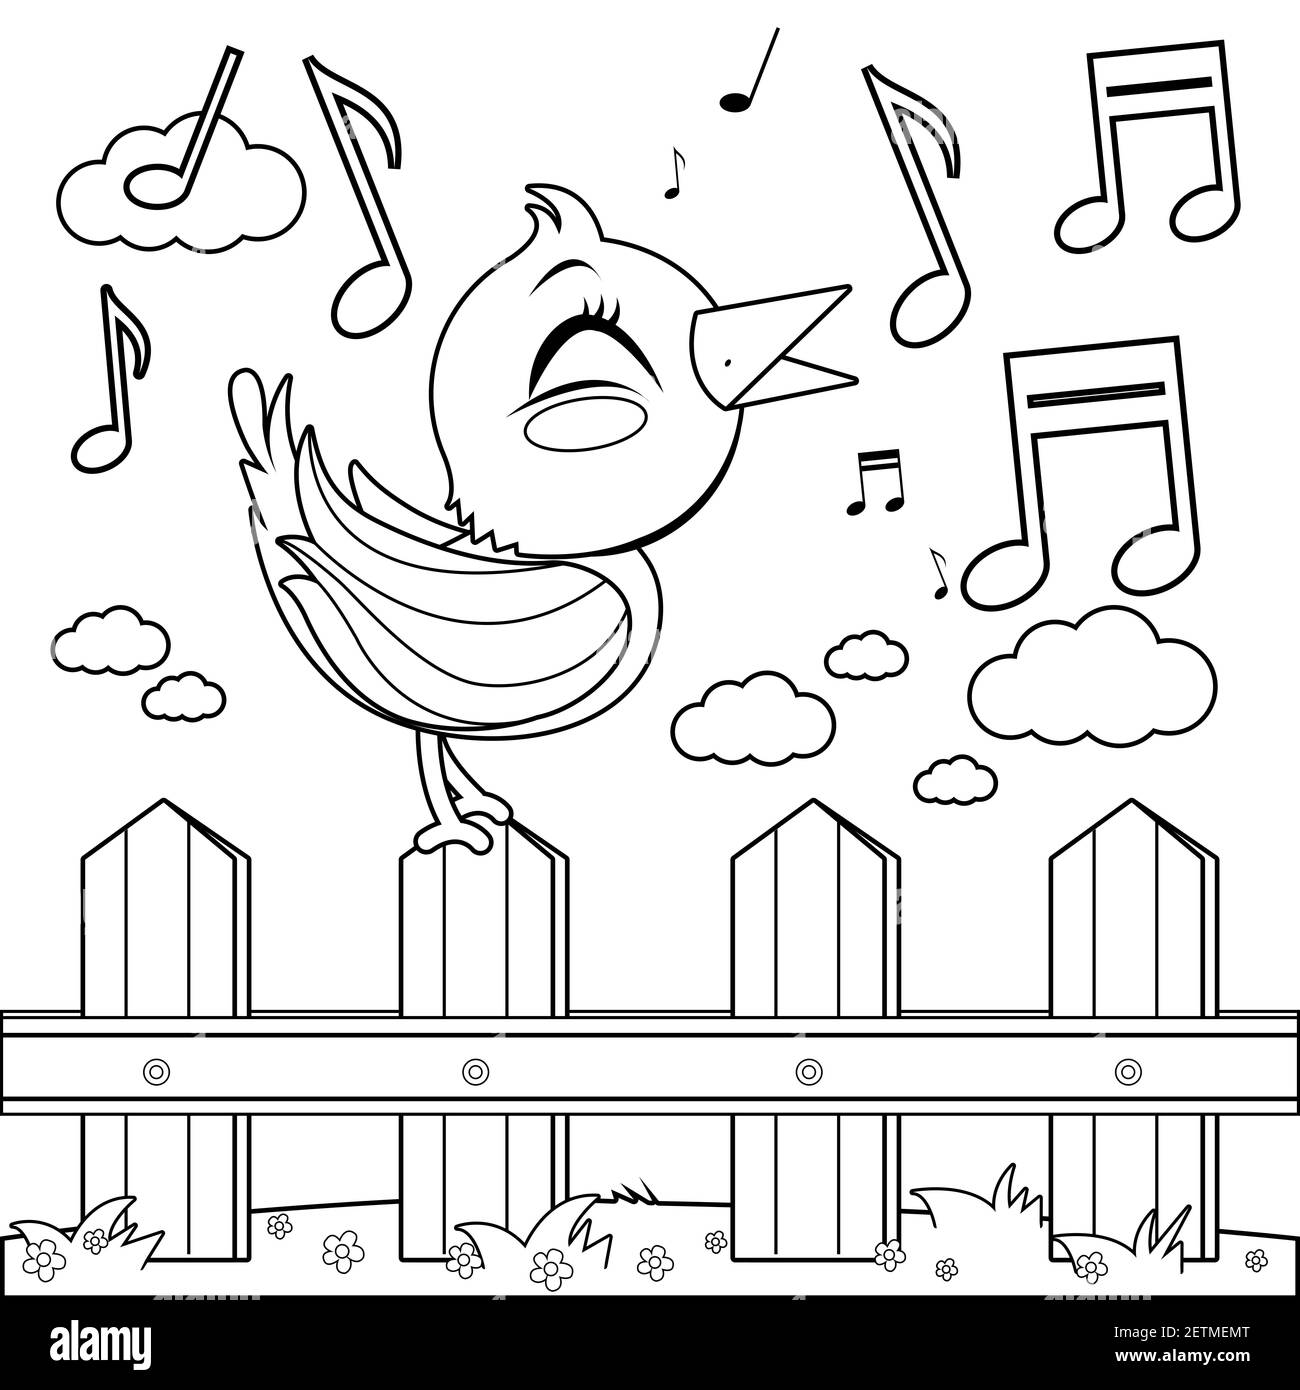 Cute bird singing on a wooden fence. Black and white coloring page. Stock Photo